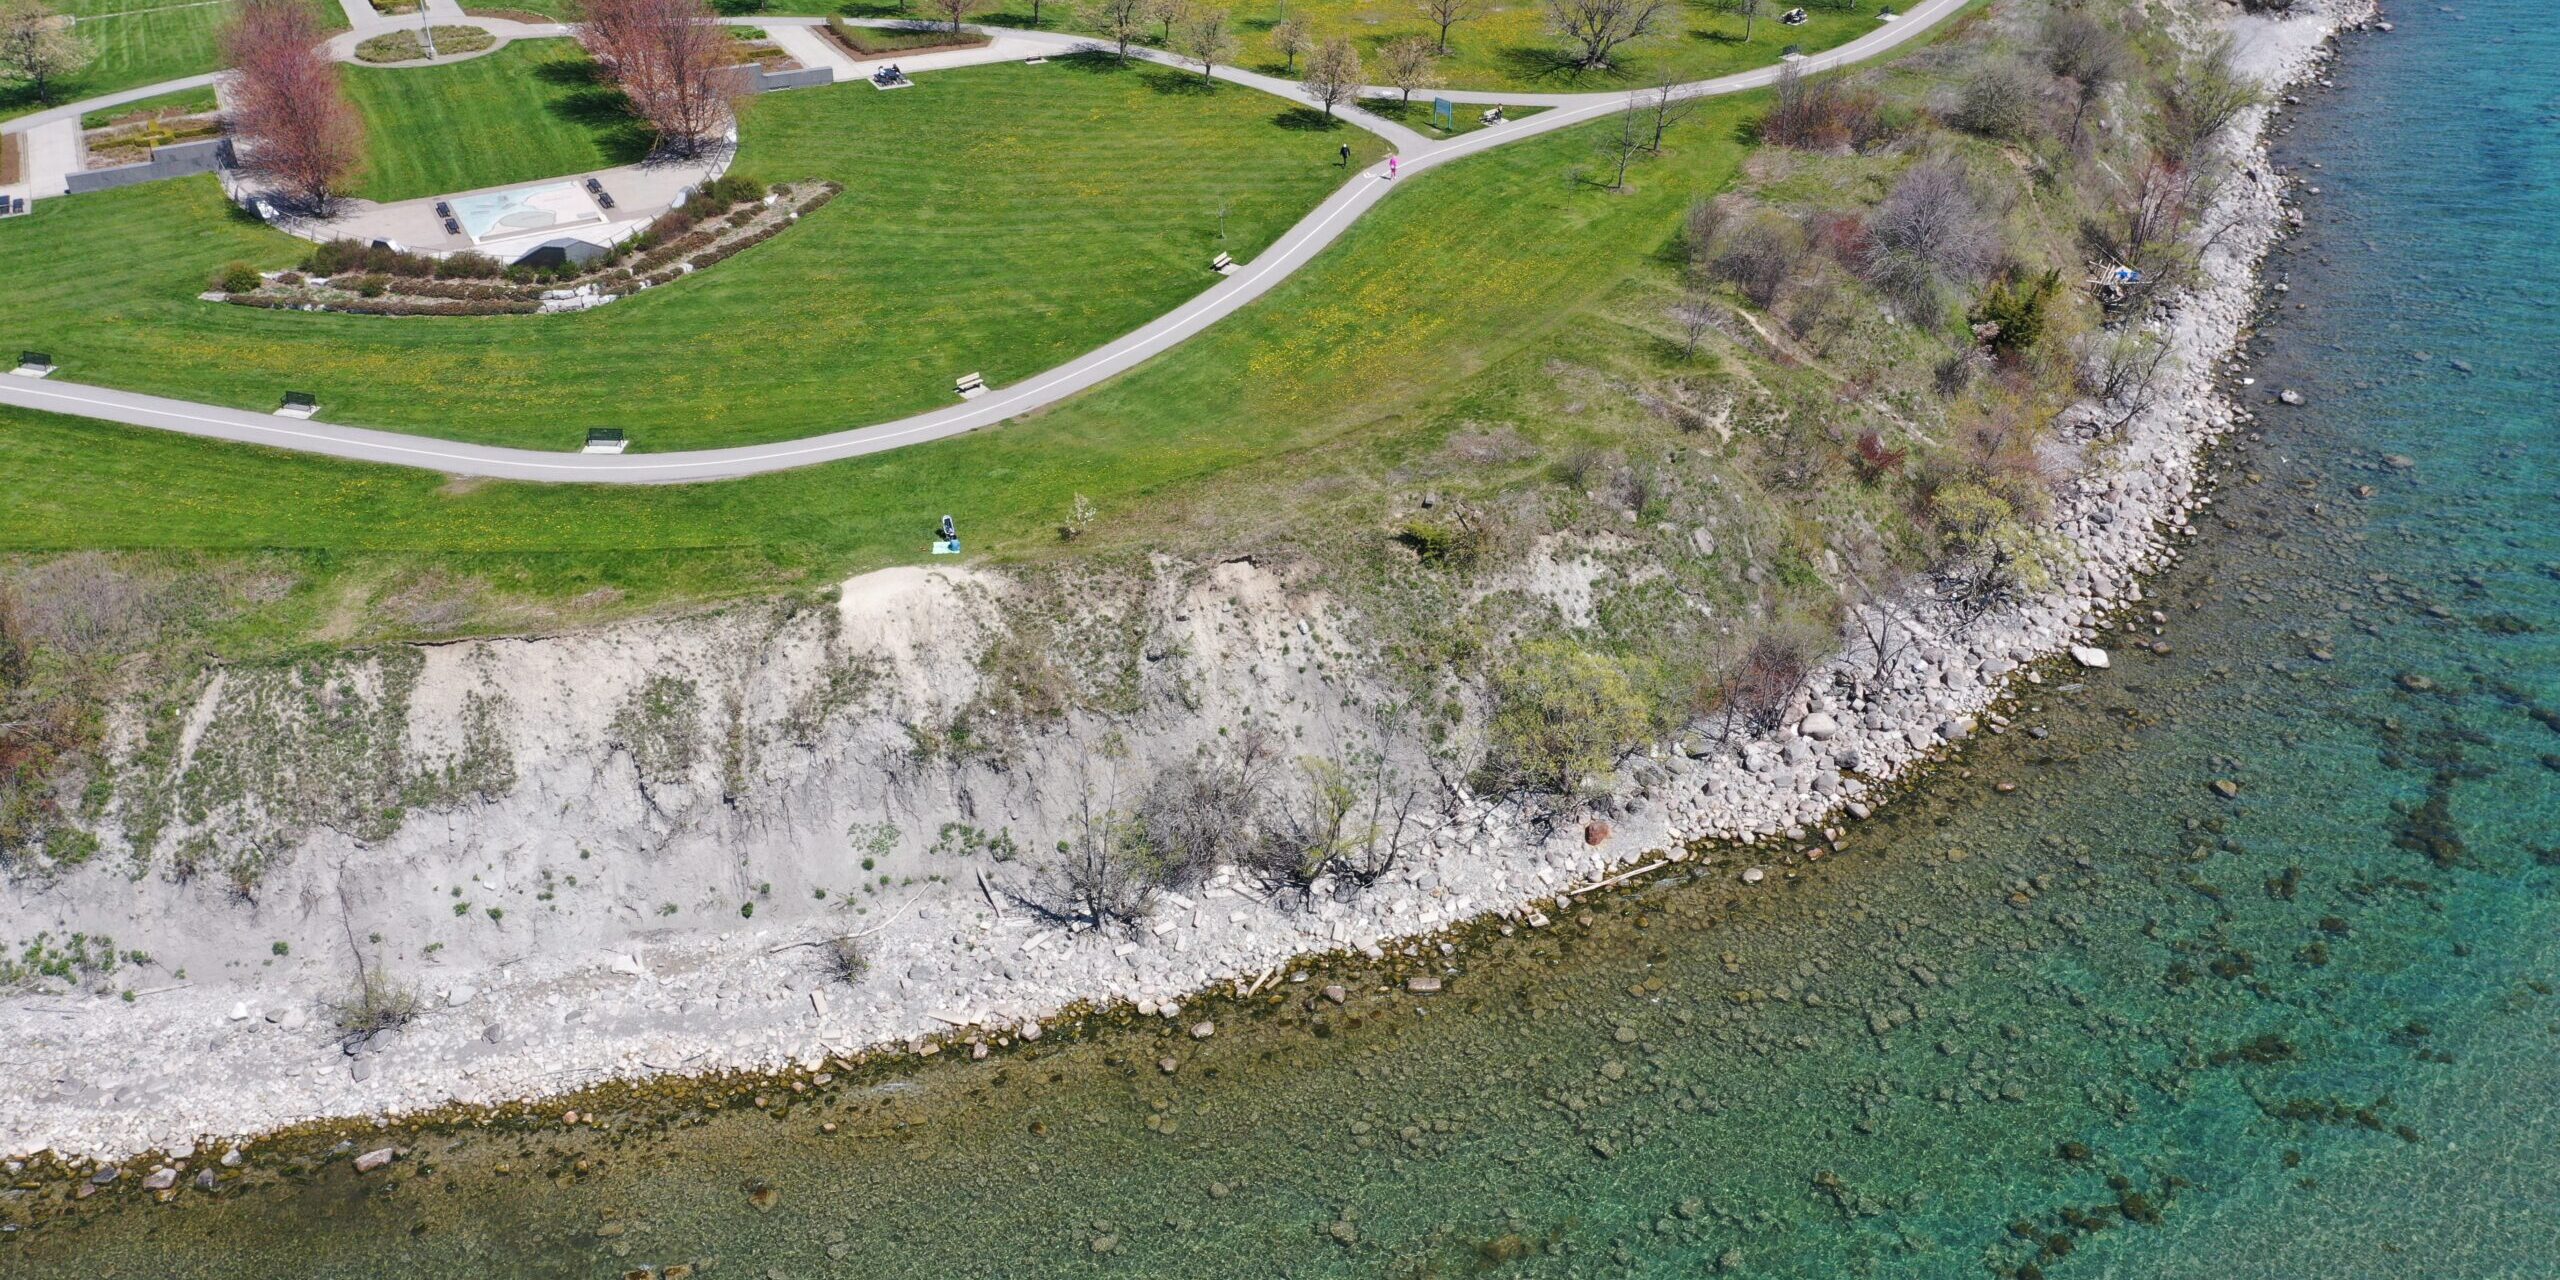 An aerial image of the shoreline around Veteran's Point Gardens showing a naturally occuring cobble beach on the right side. Stones of various size comprise the shoreline area.